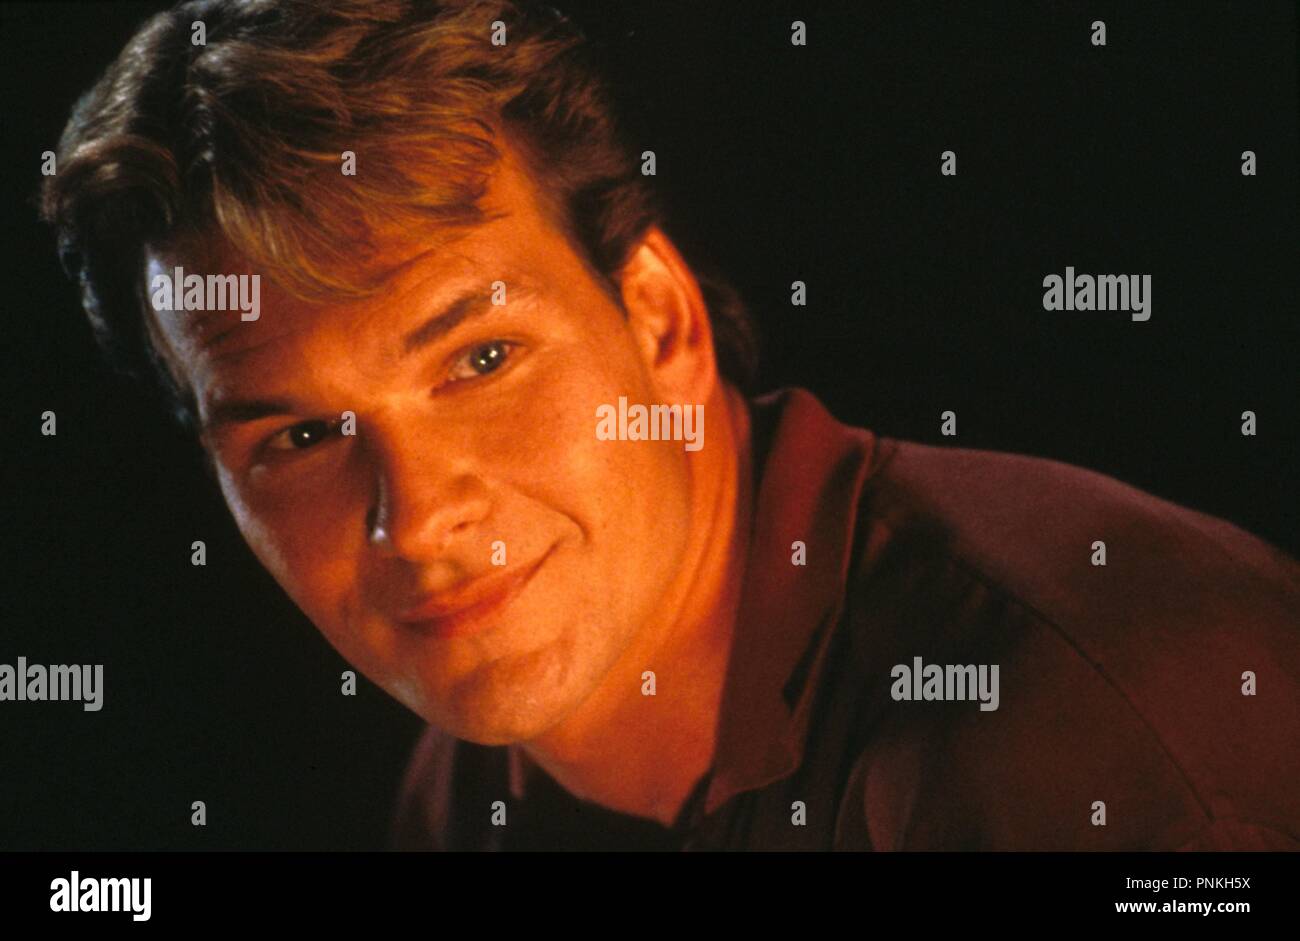 Original film title: GHOST. English title: GHOST. Year: 1990. Director: JERRY ZUCKER. Stars: PATRICK SWAYZE. Credit: PARAMOUNT PICTURES / Album Stock Photo